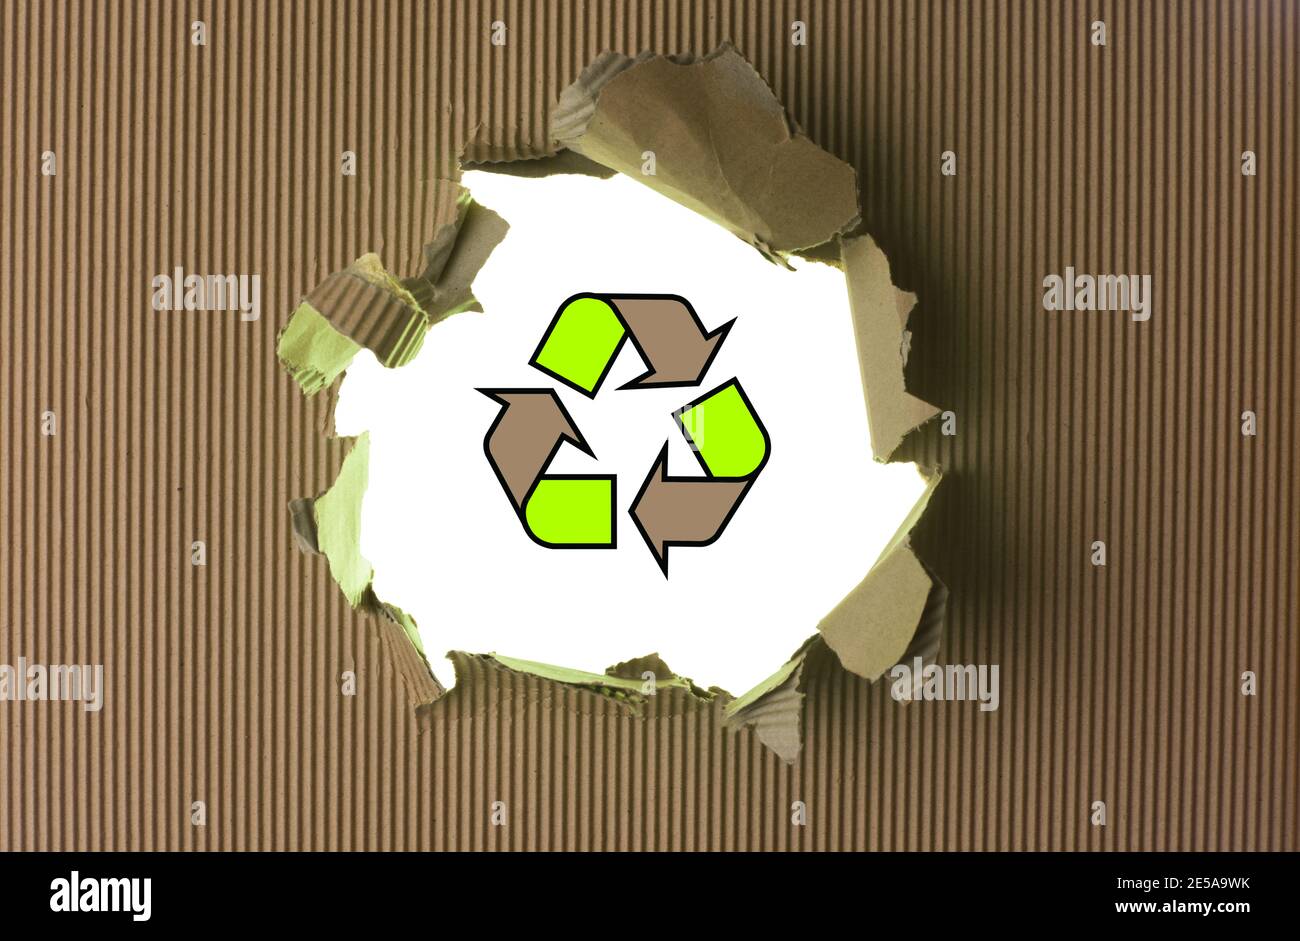 Ripped brown paper with recycle logo against background Stock Photo